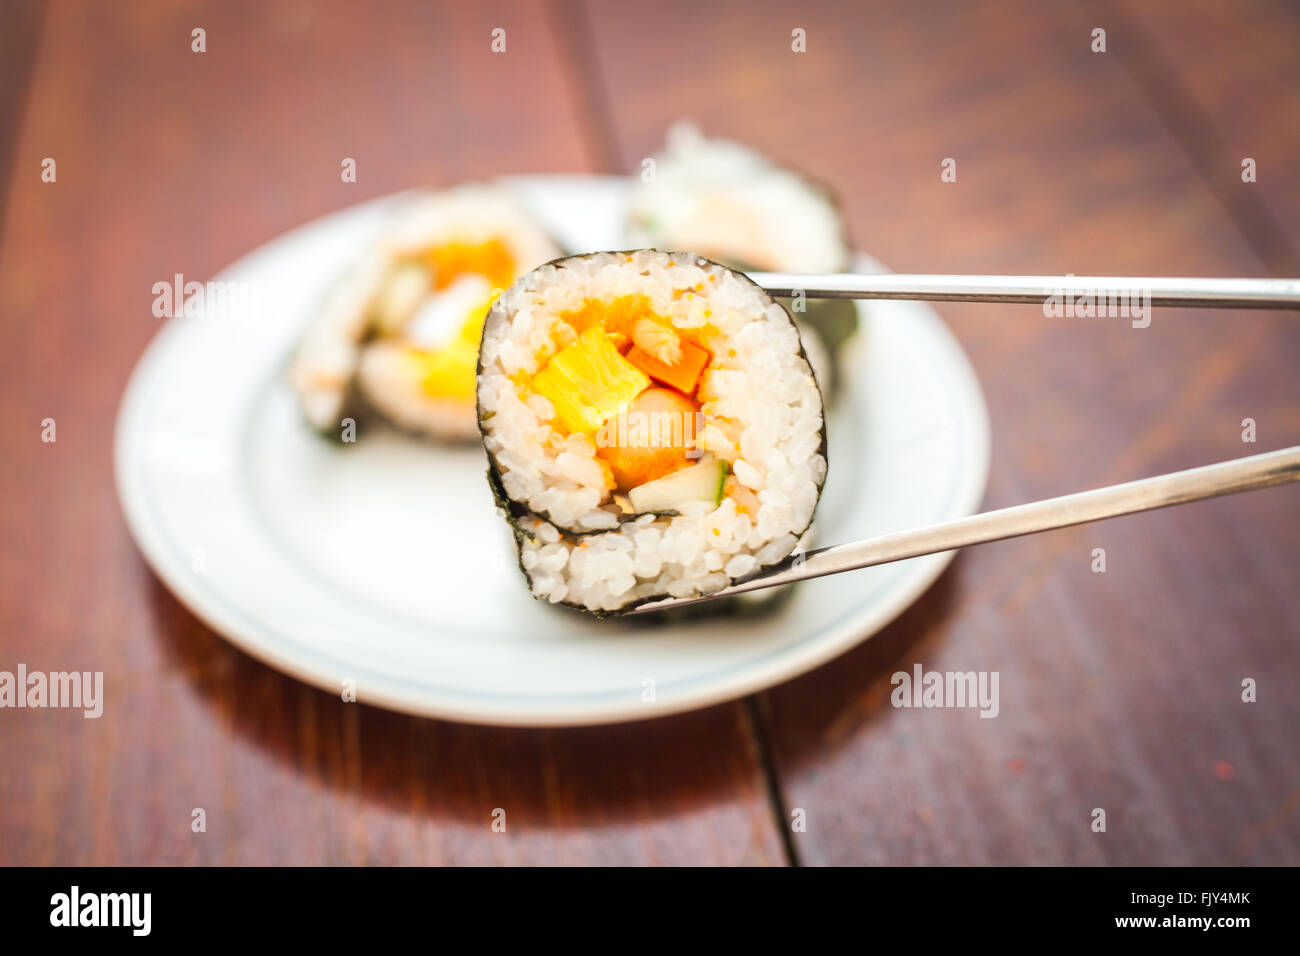 Rice sushi rolls assortment on white plate and gray chopsticks Stock Photo